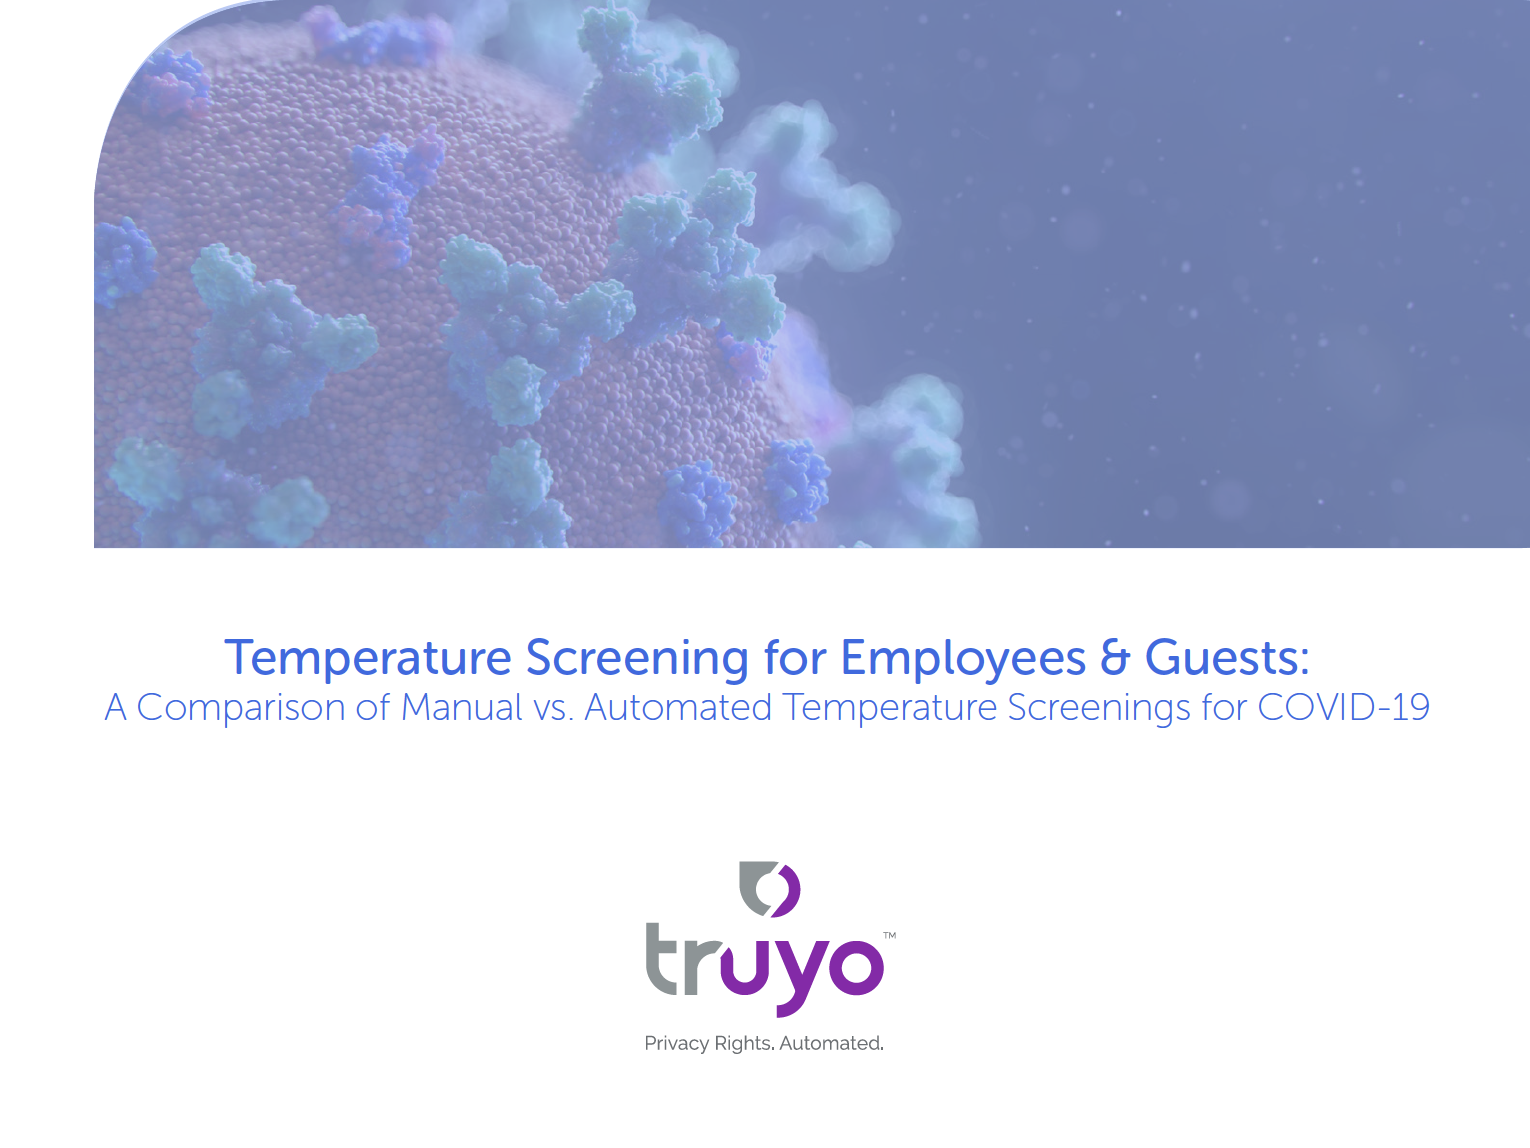 Temperature Screening Employees & Guests